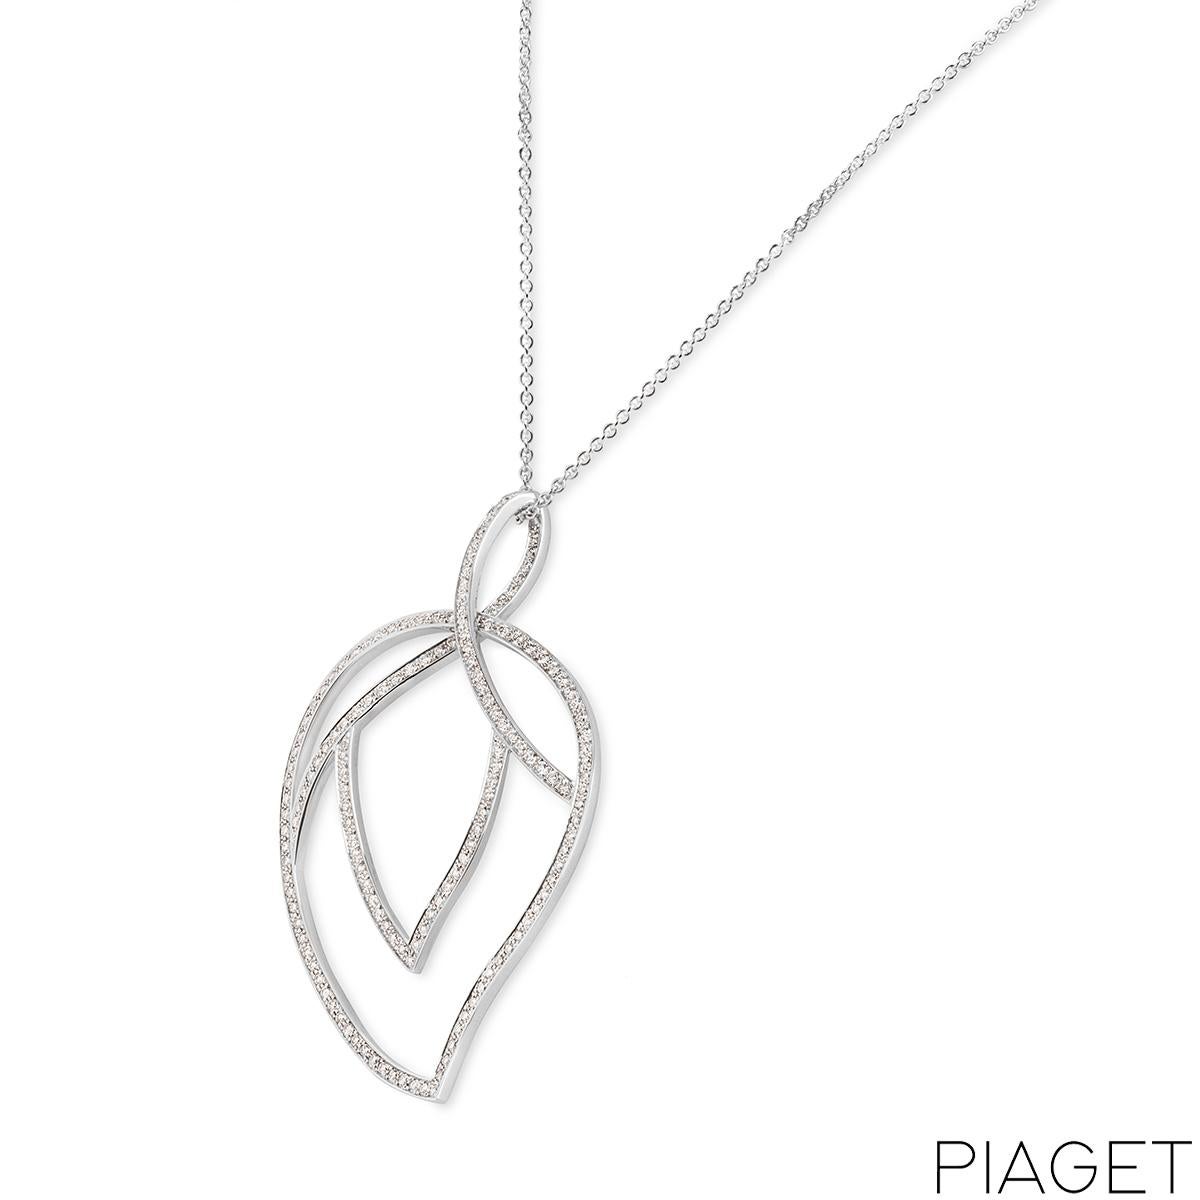 A mesmerizing 18k white gold diamond pendant by Piaget. The pendant features an openwork leaf motif adorned with 160 round brilliant cut diamonds. The pave set diamonds have an approximate total weight of 3.15ct, E-F colour and VS clarity. The